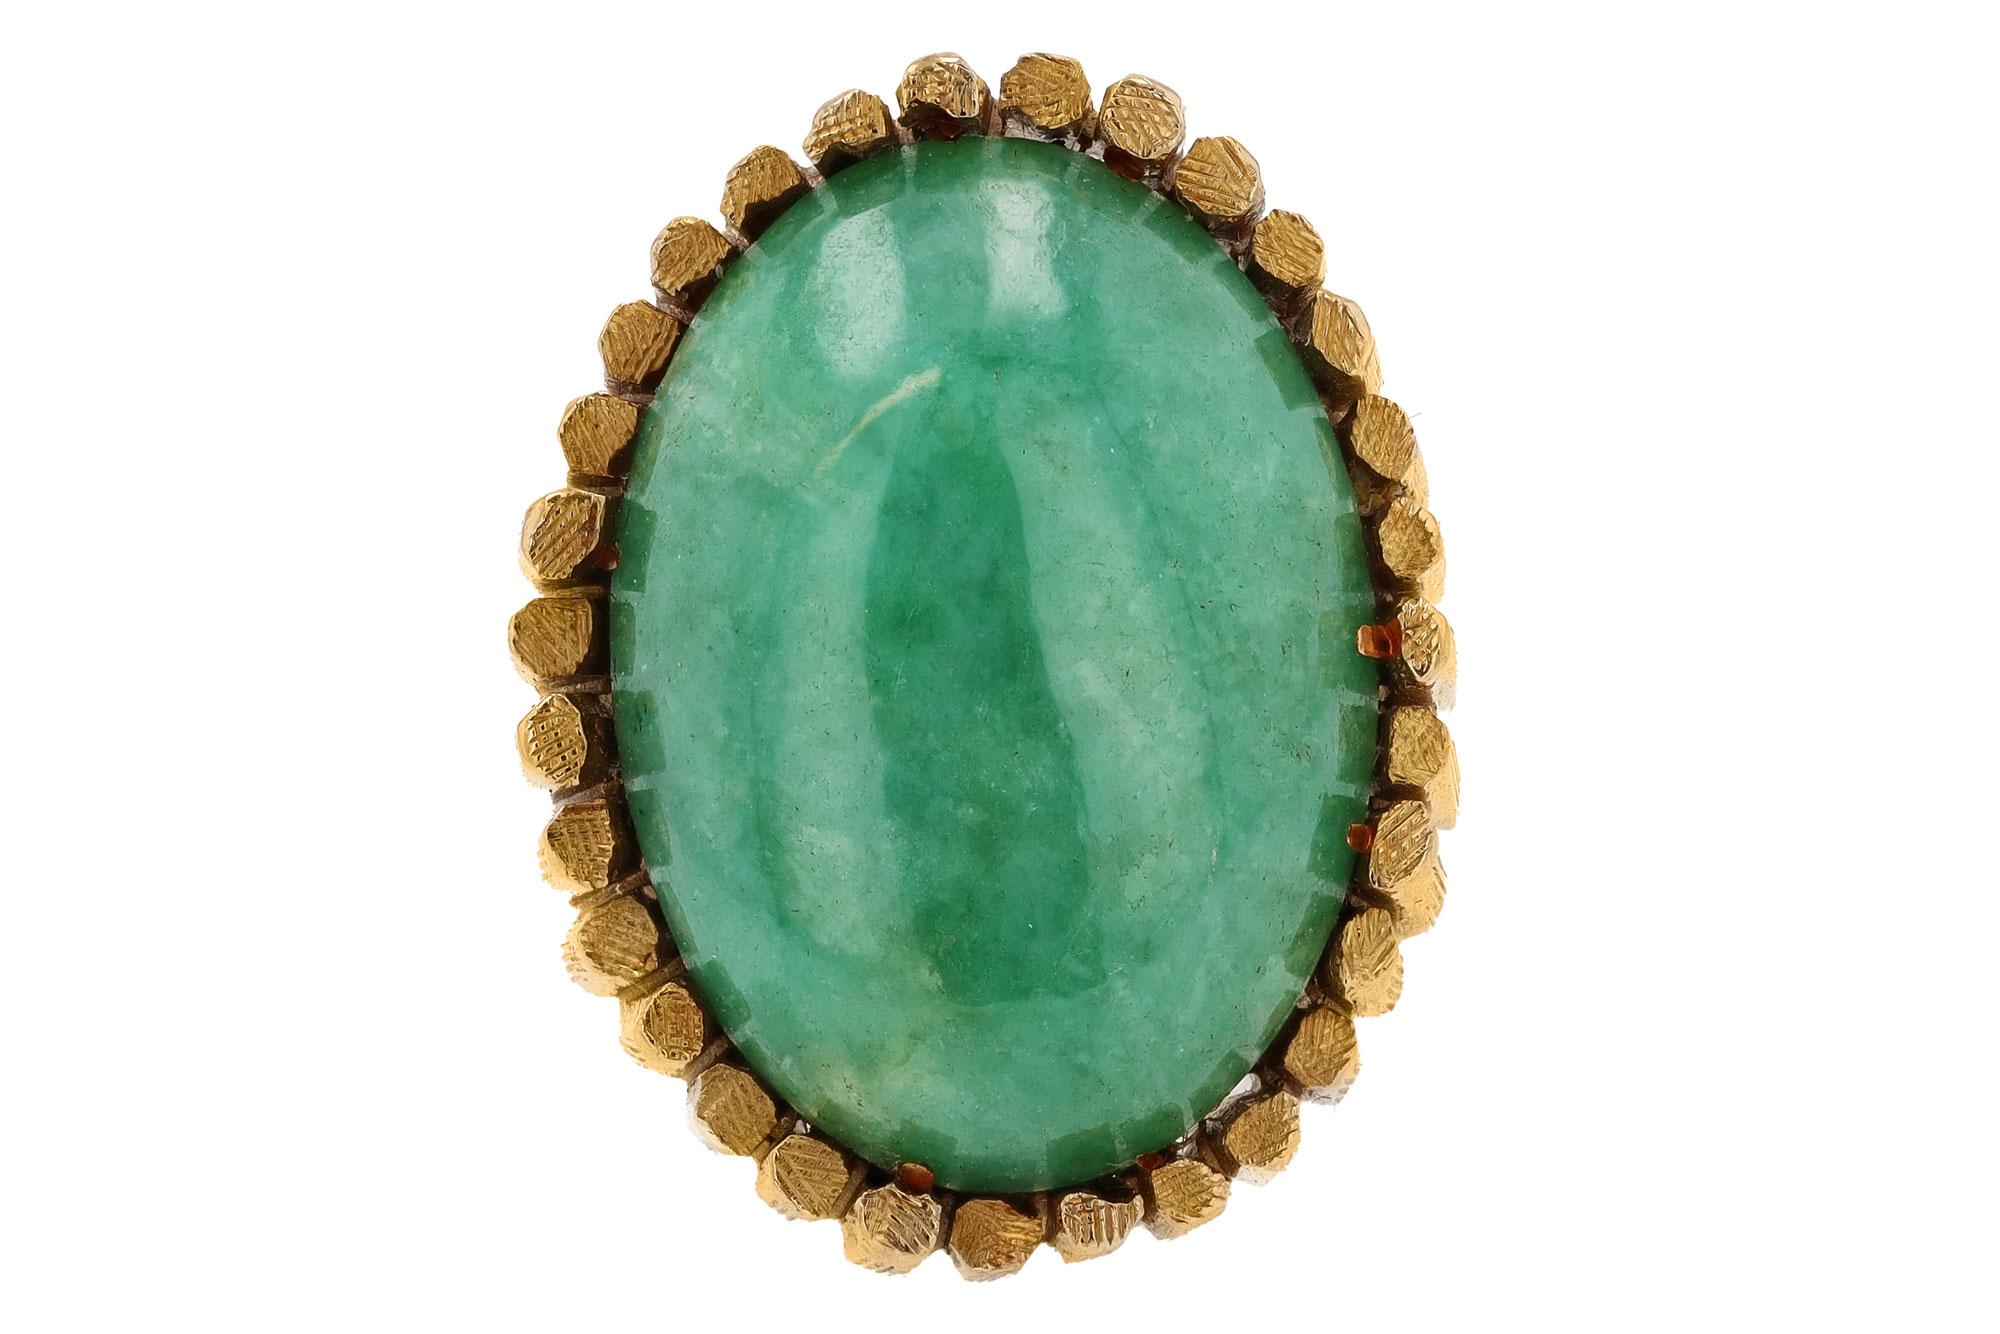 An edgy design reminiscent of volcanic basalt columns surrounds a 15 carat verdant green Jade in this modernist cocktail ring. The natural, type A Jadeite is untreated and has a delightfully refreshing apple green with mottling providing depth.